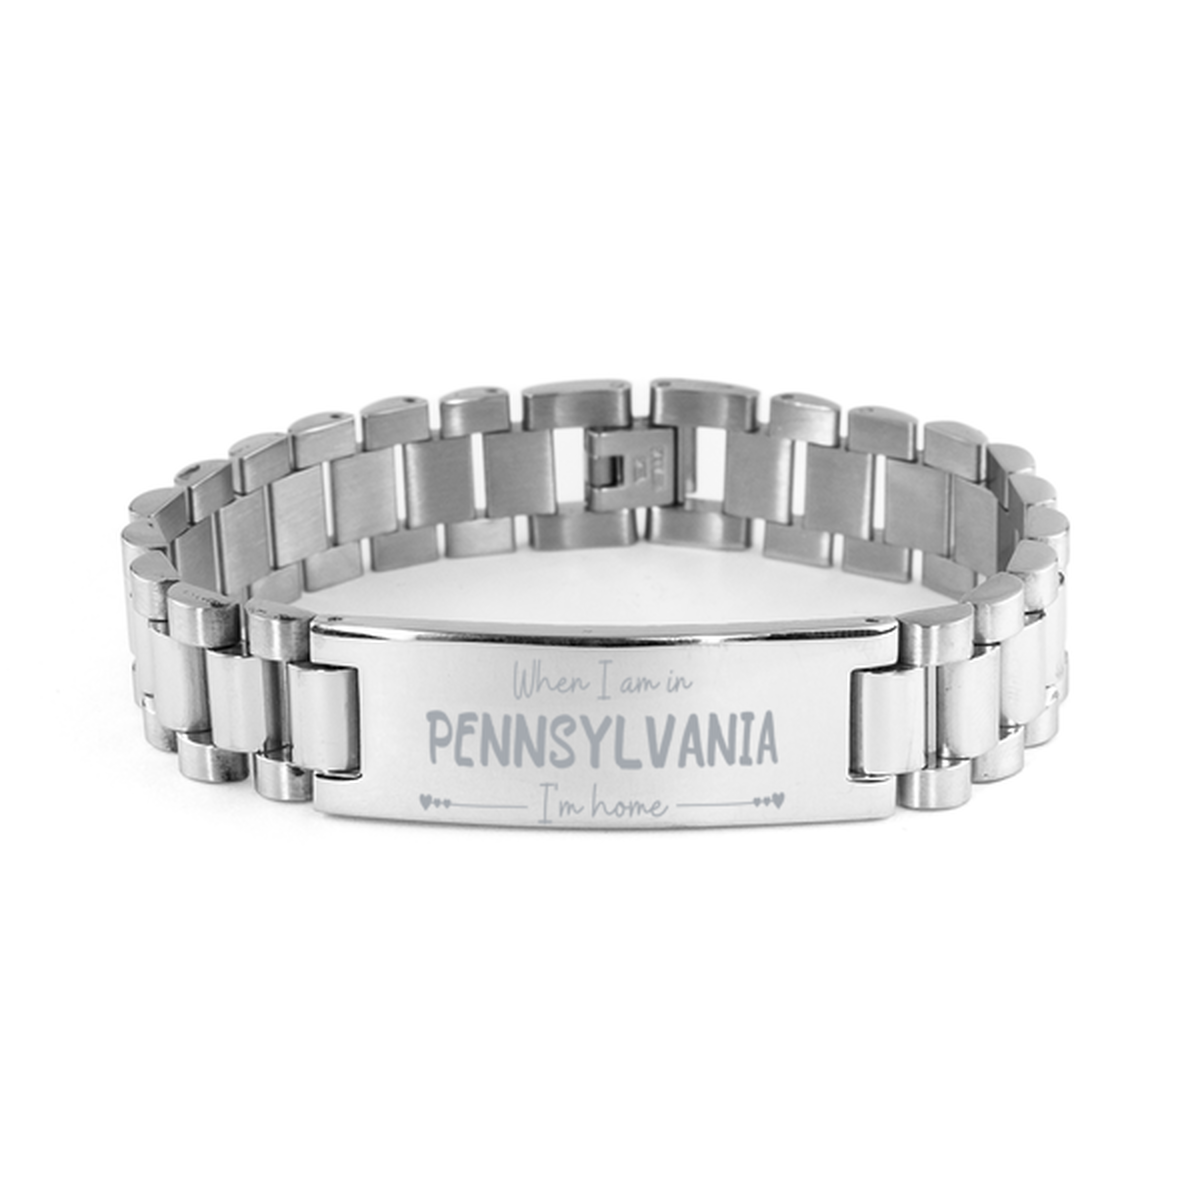 When I am in Pennsylvania I'm home Ladder Stainless Steel Bracelet, Cheap Gifts For Pennsylvania, State Pennsylvania Birthday Gifts for Friends Coworker